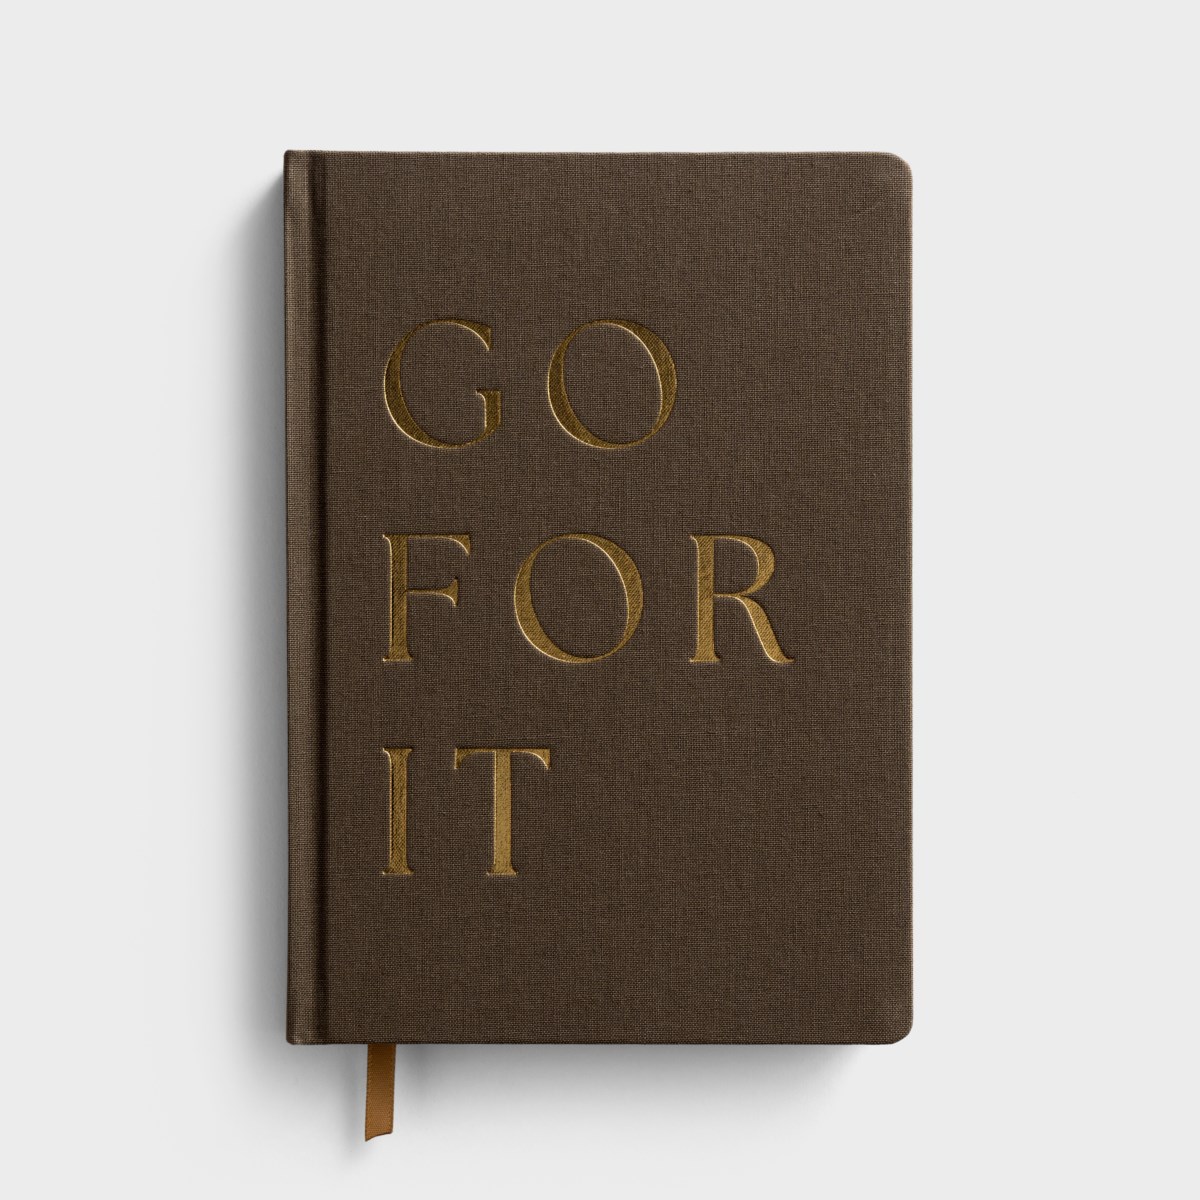 Go For It - Fabric Journal